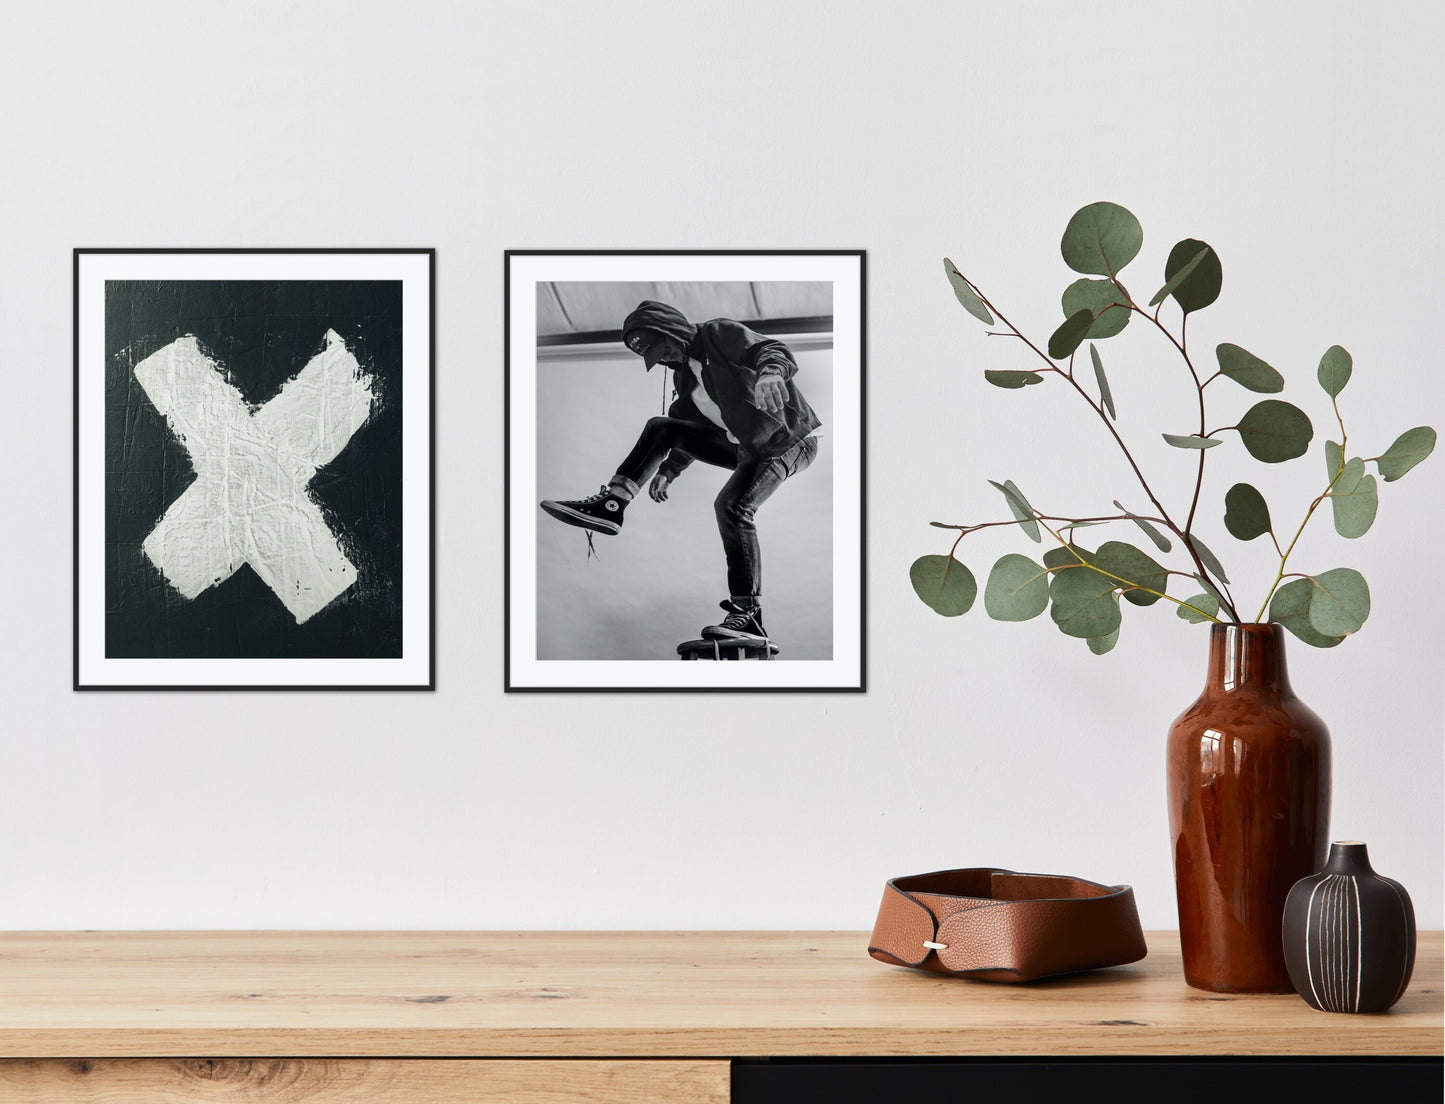 Black and white grunge room décor set of 2 INSTANT DOWNLOAD, skateboard wall art, black white wall decor, grunge posters set of two, skater